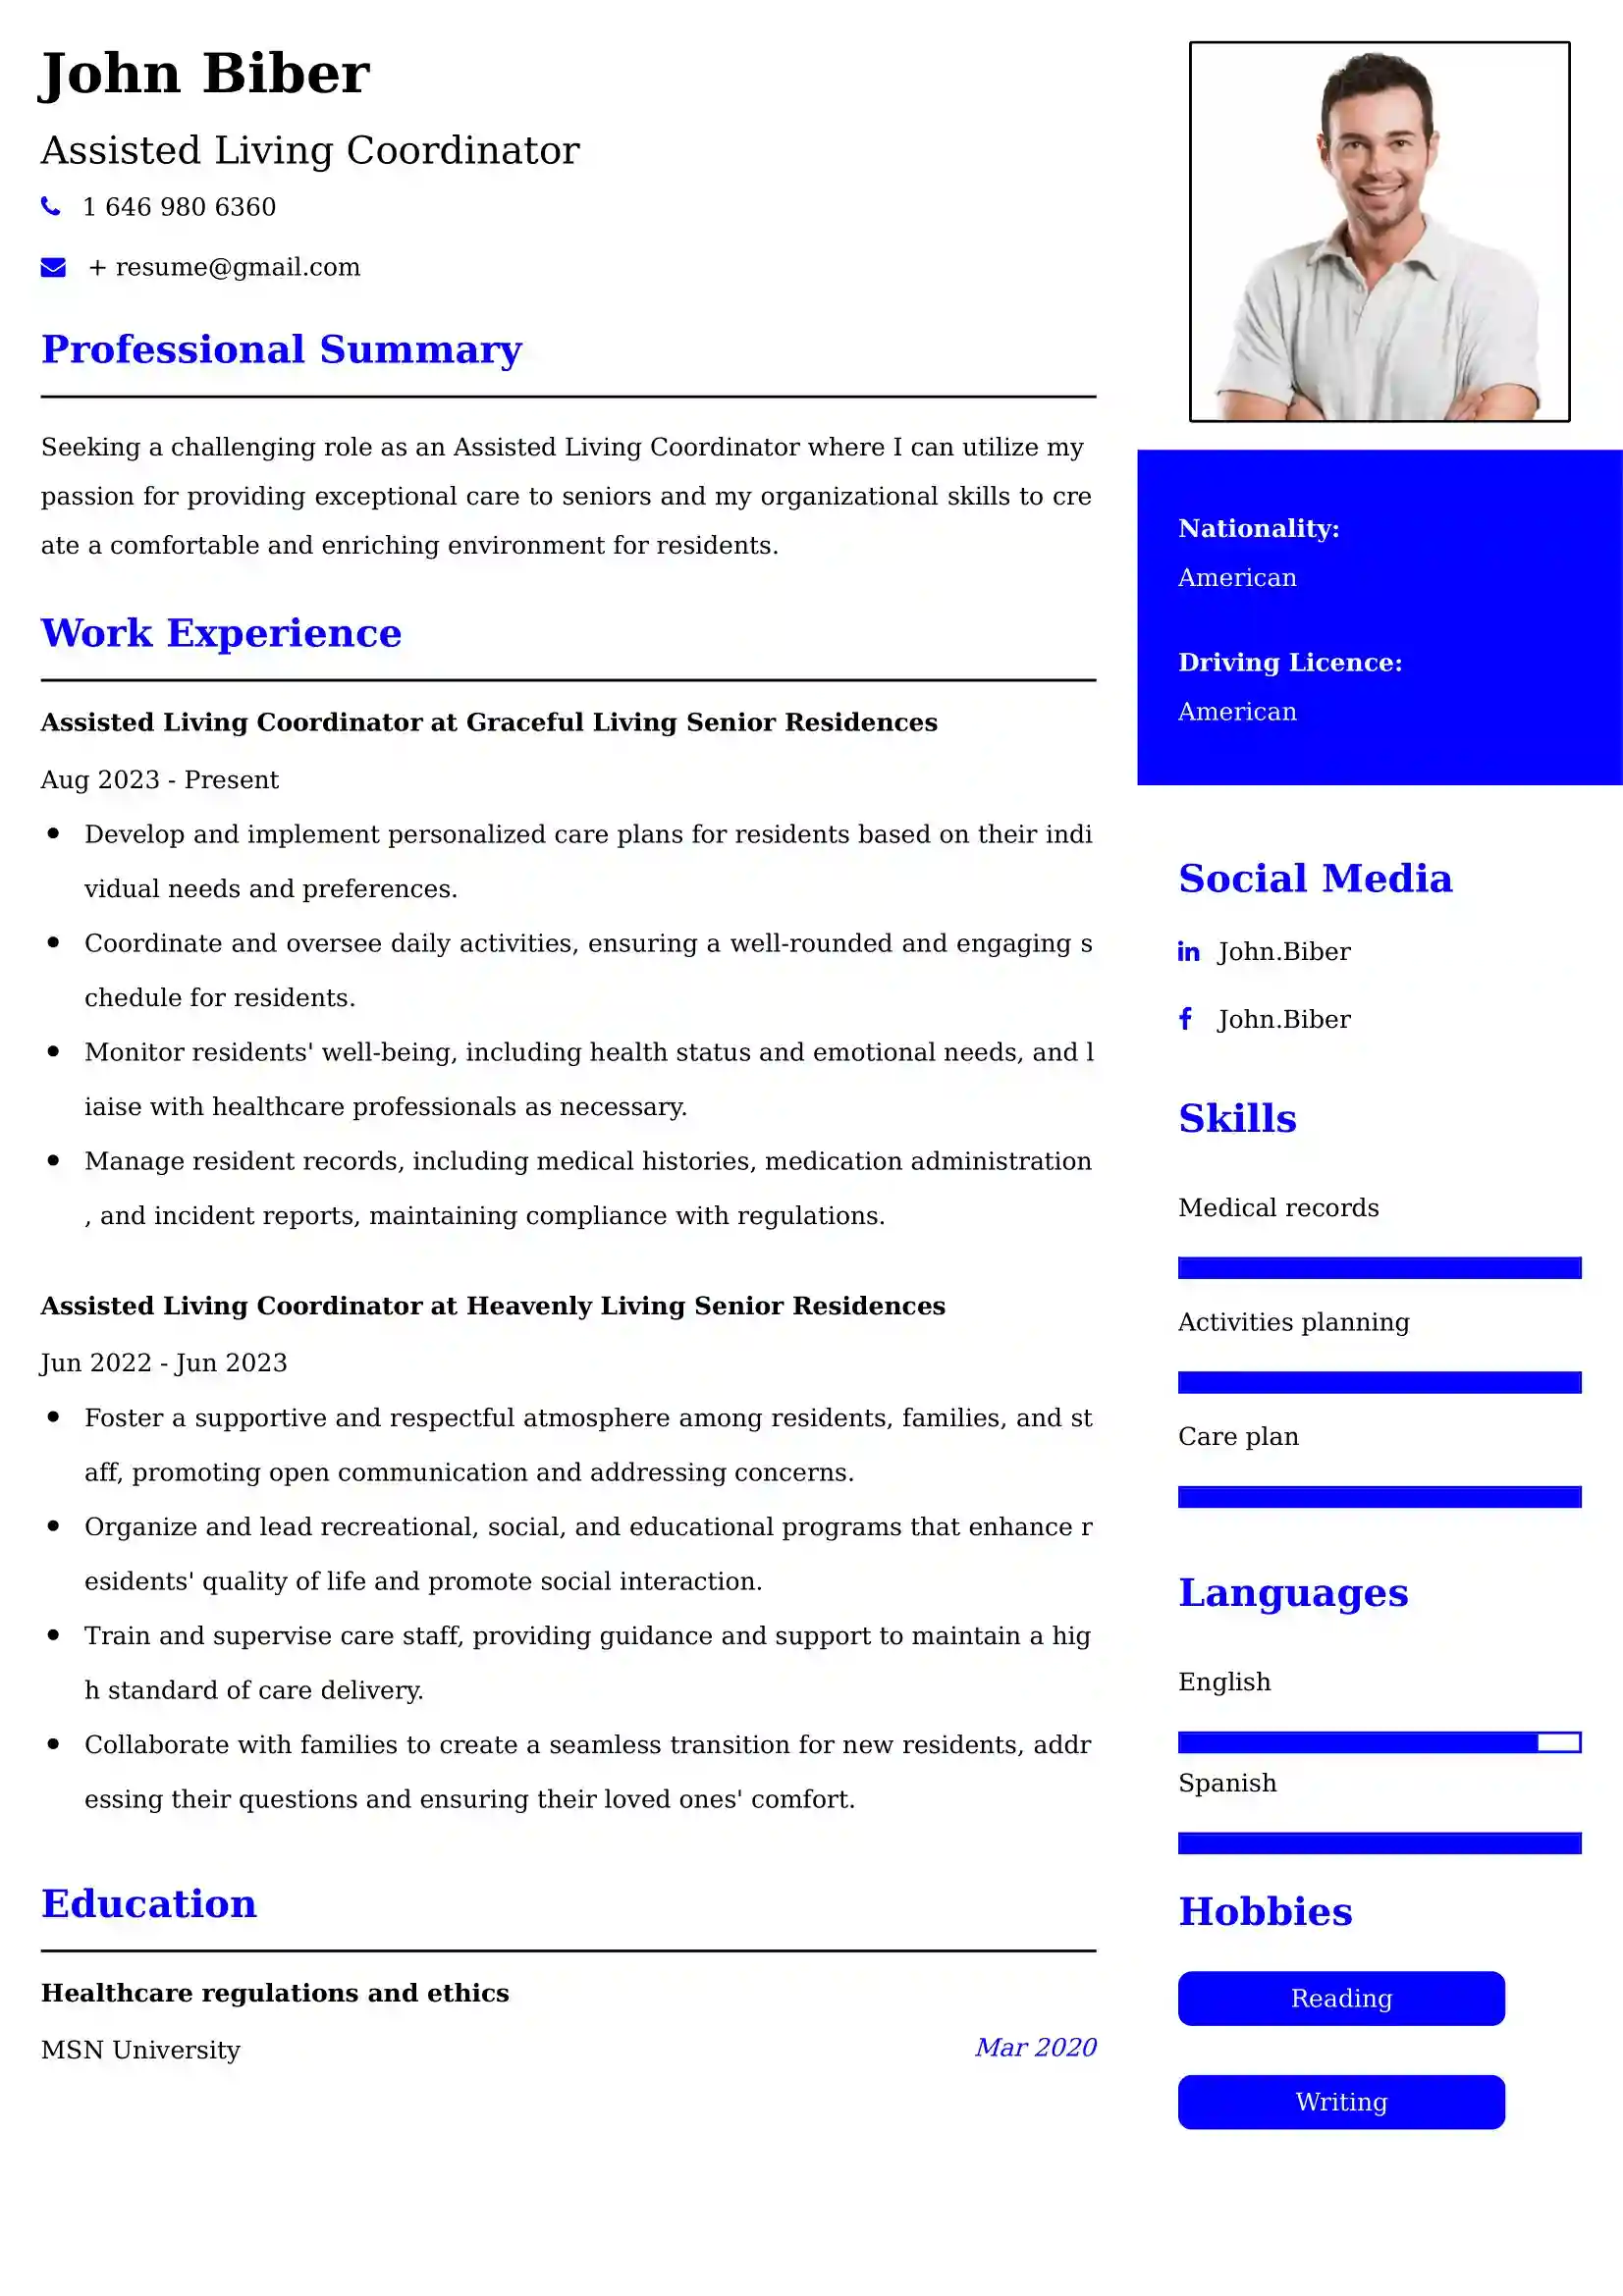 Assisted Living Coordinator Resume Example